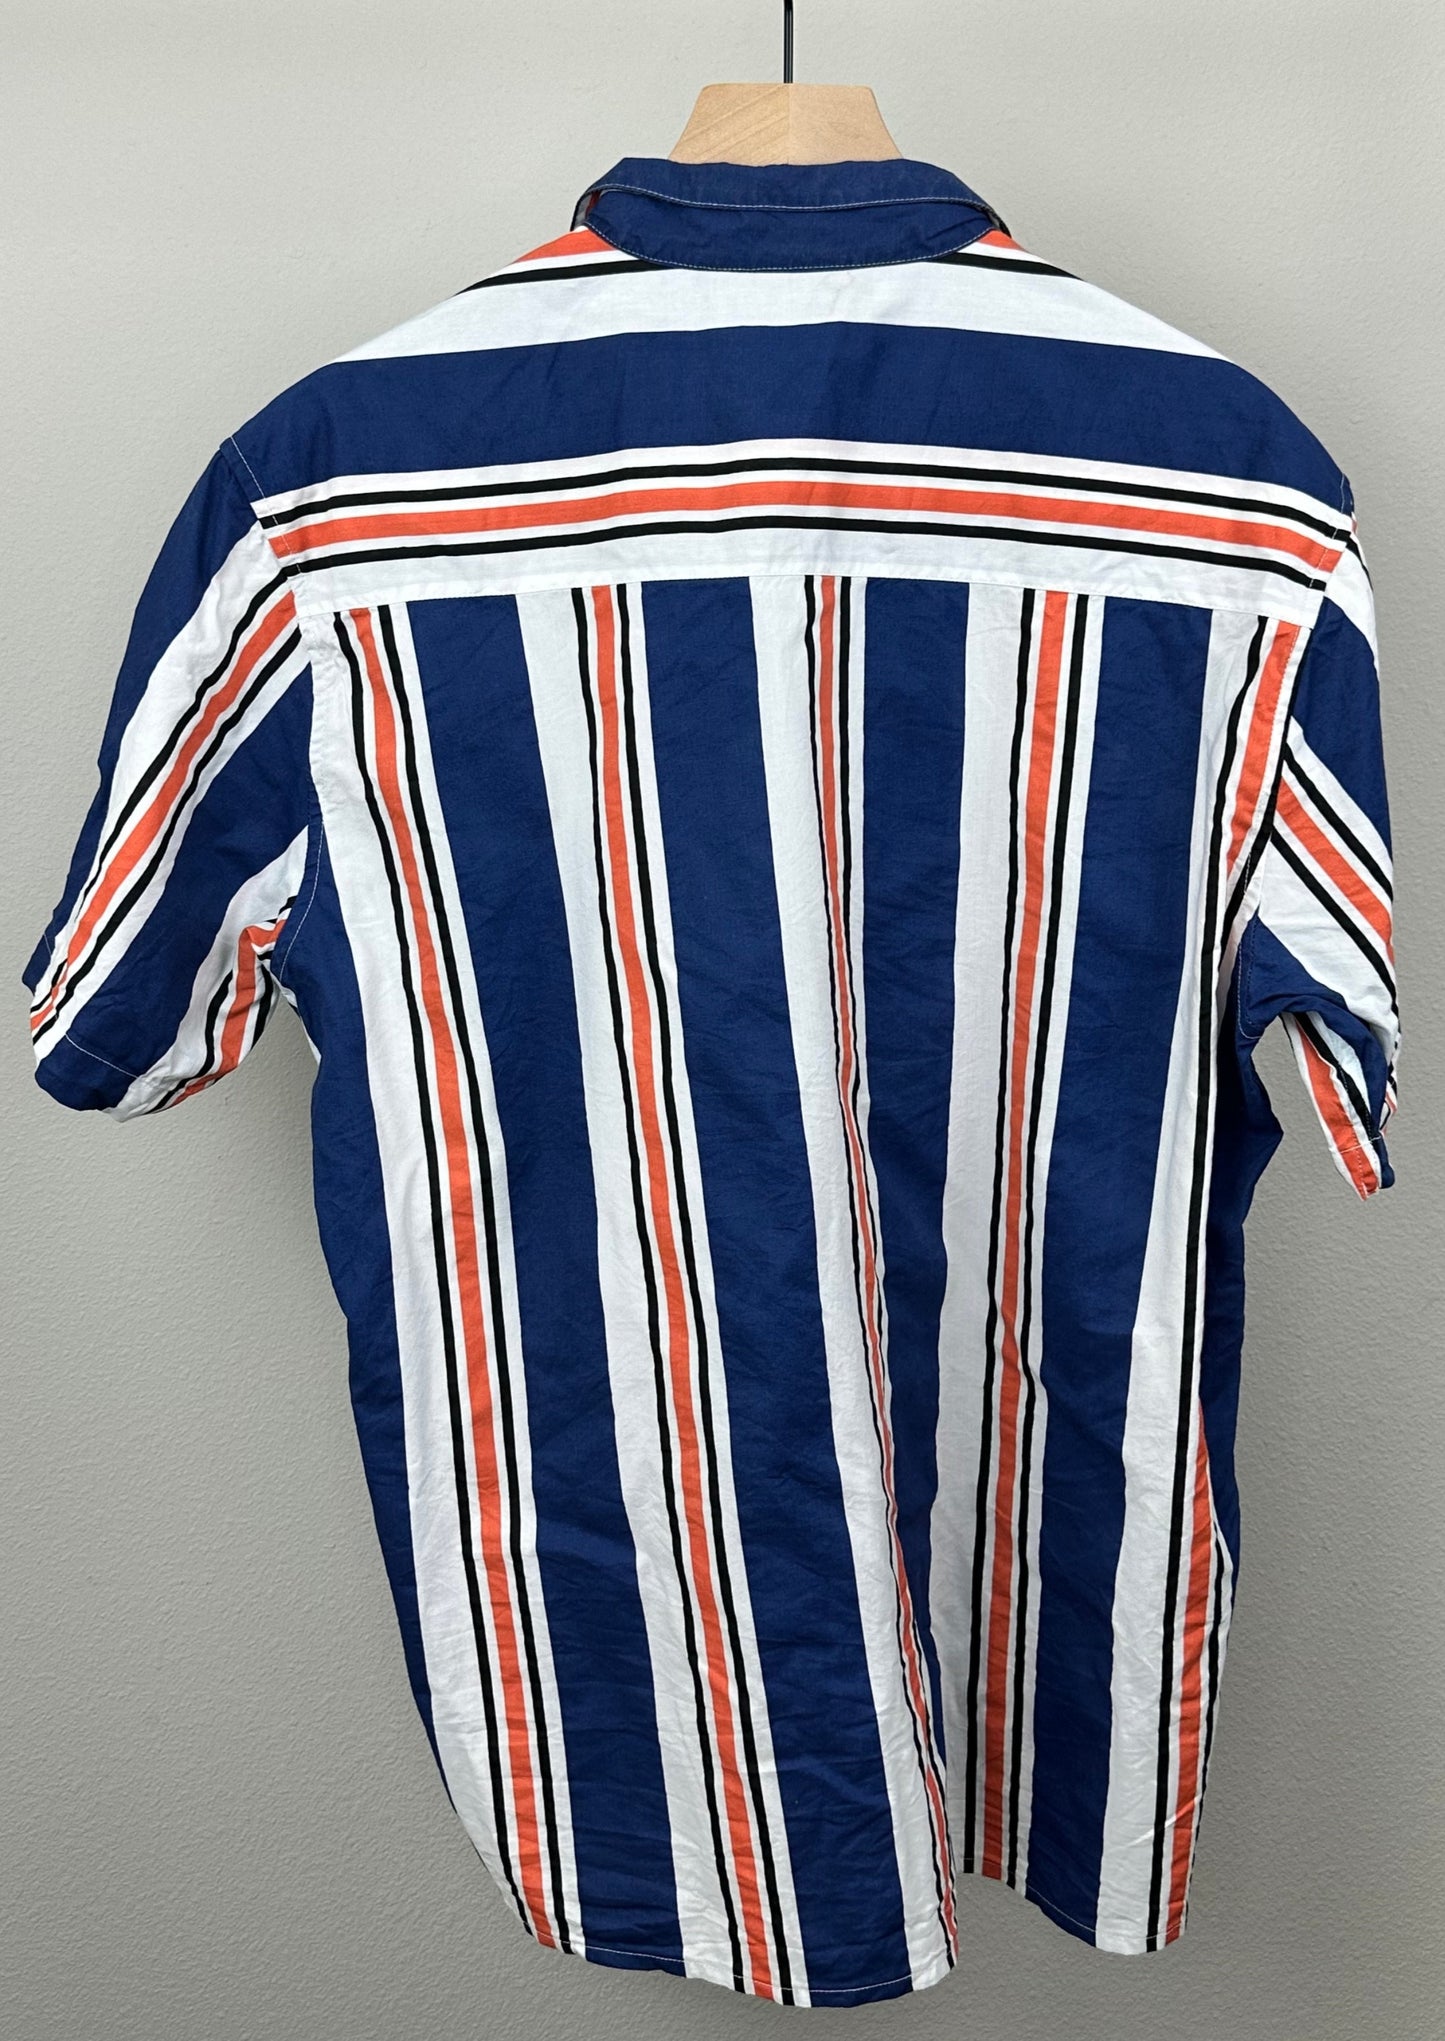 Orange and Blue Striped Button Up by Burnside